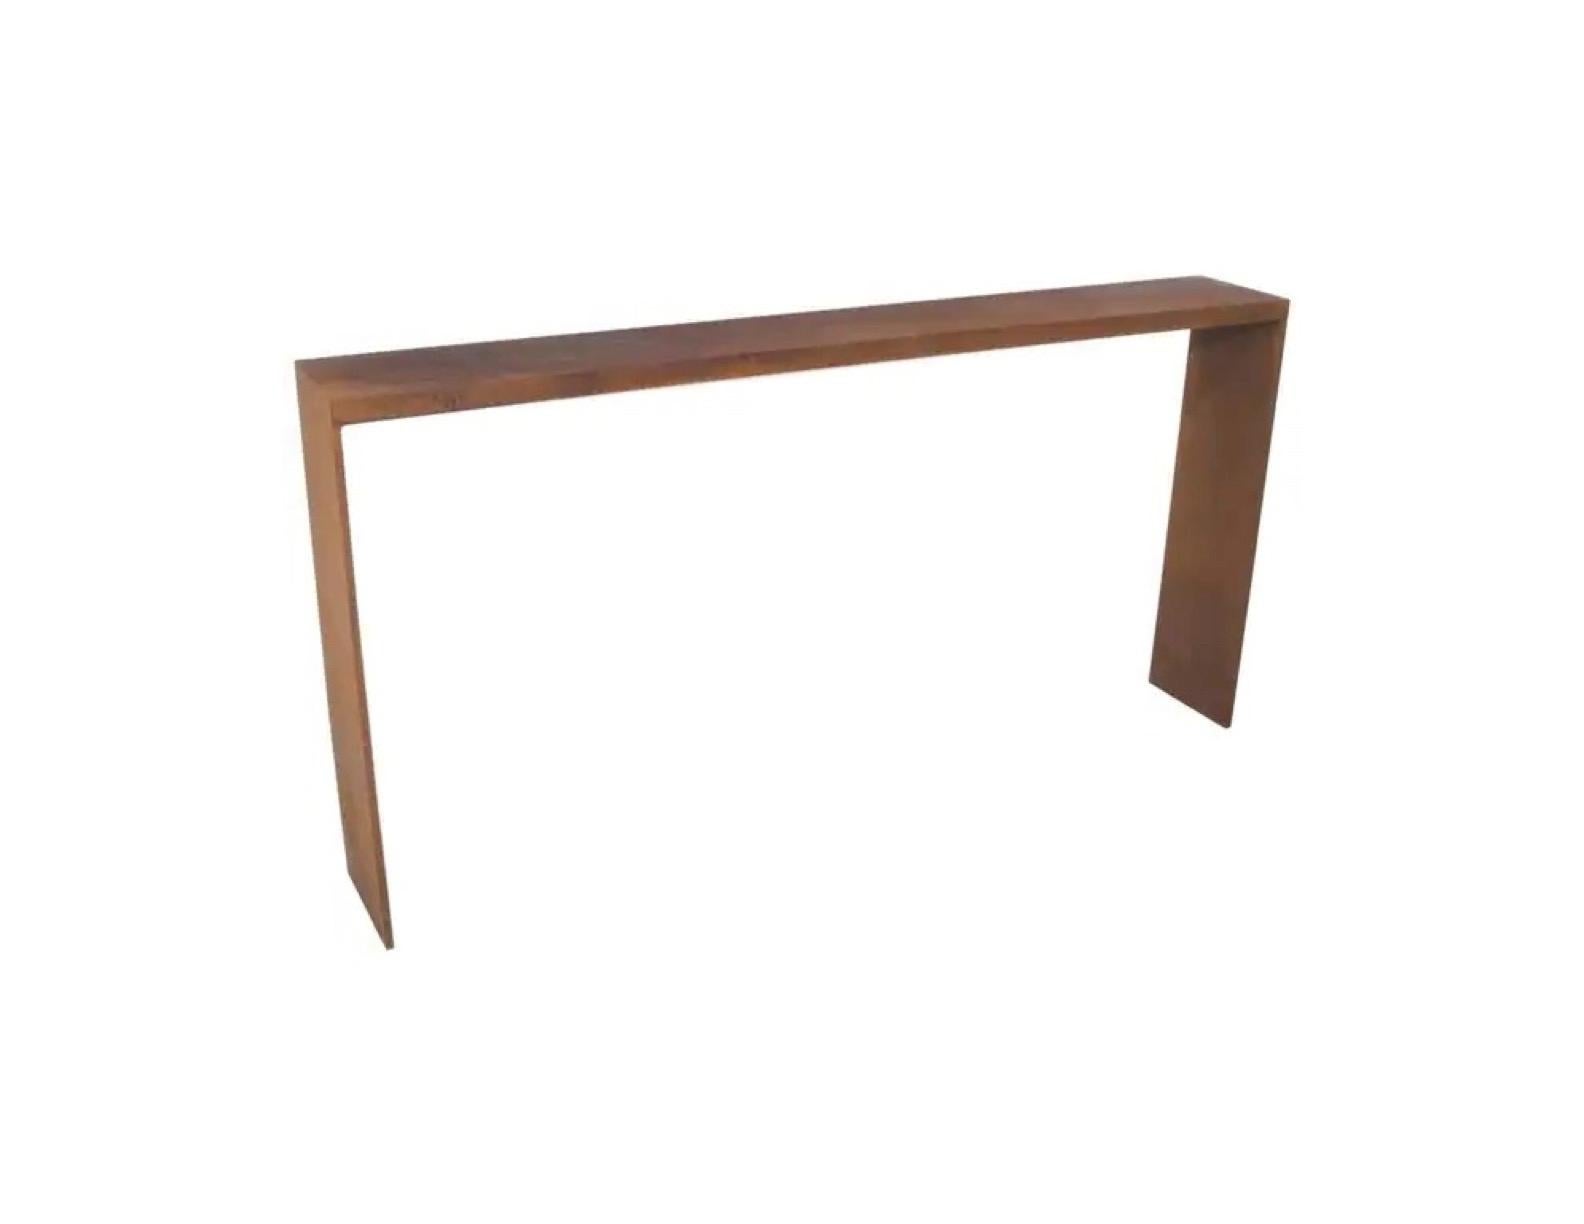 Modern Eric Slayton Corten Steel Console Table, Plate Series, 2010 For Sale